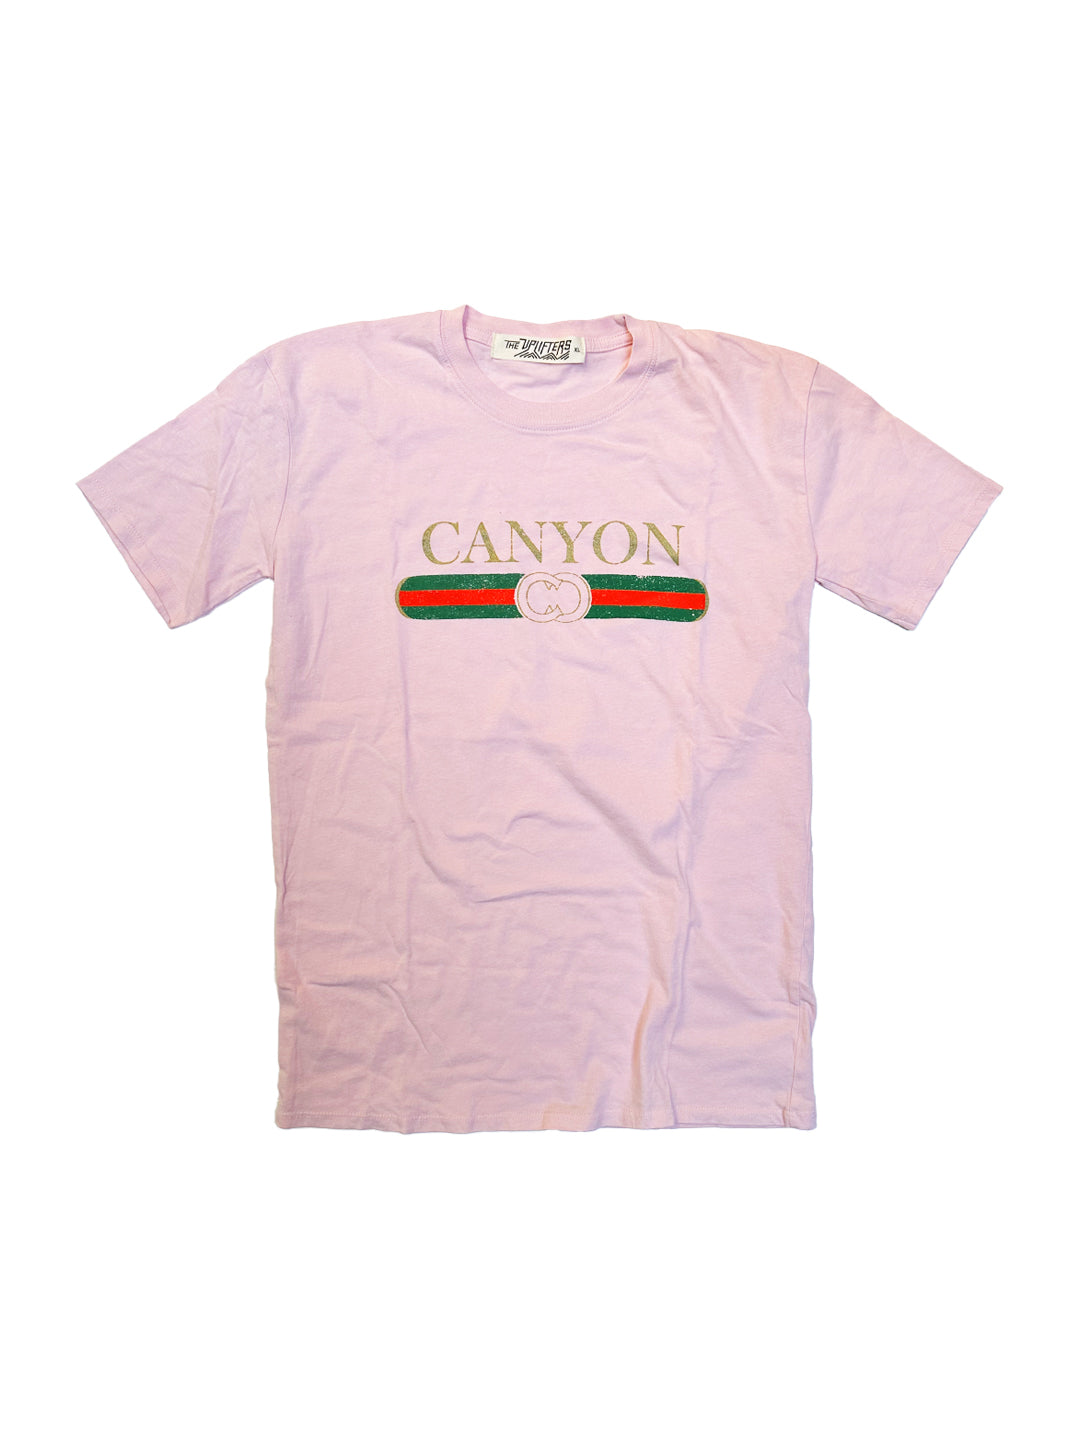 Canyon Youth Stripe Tee in Pink